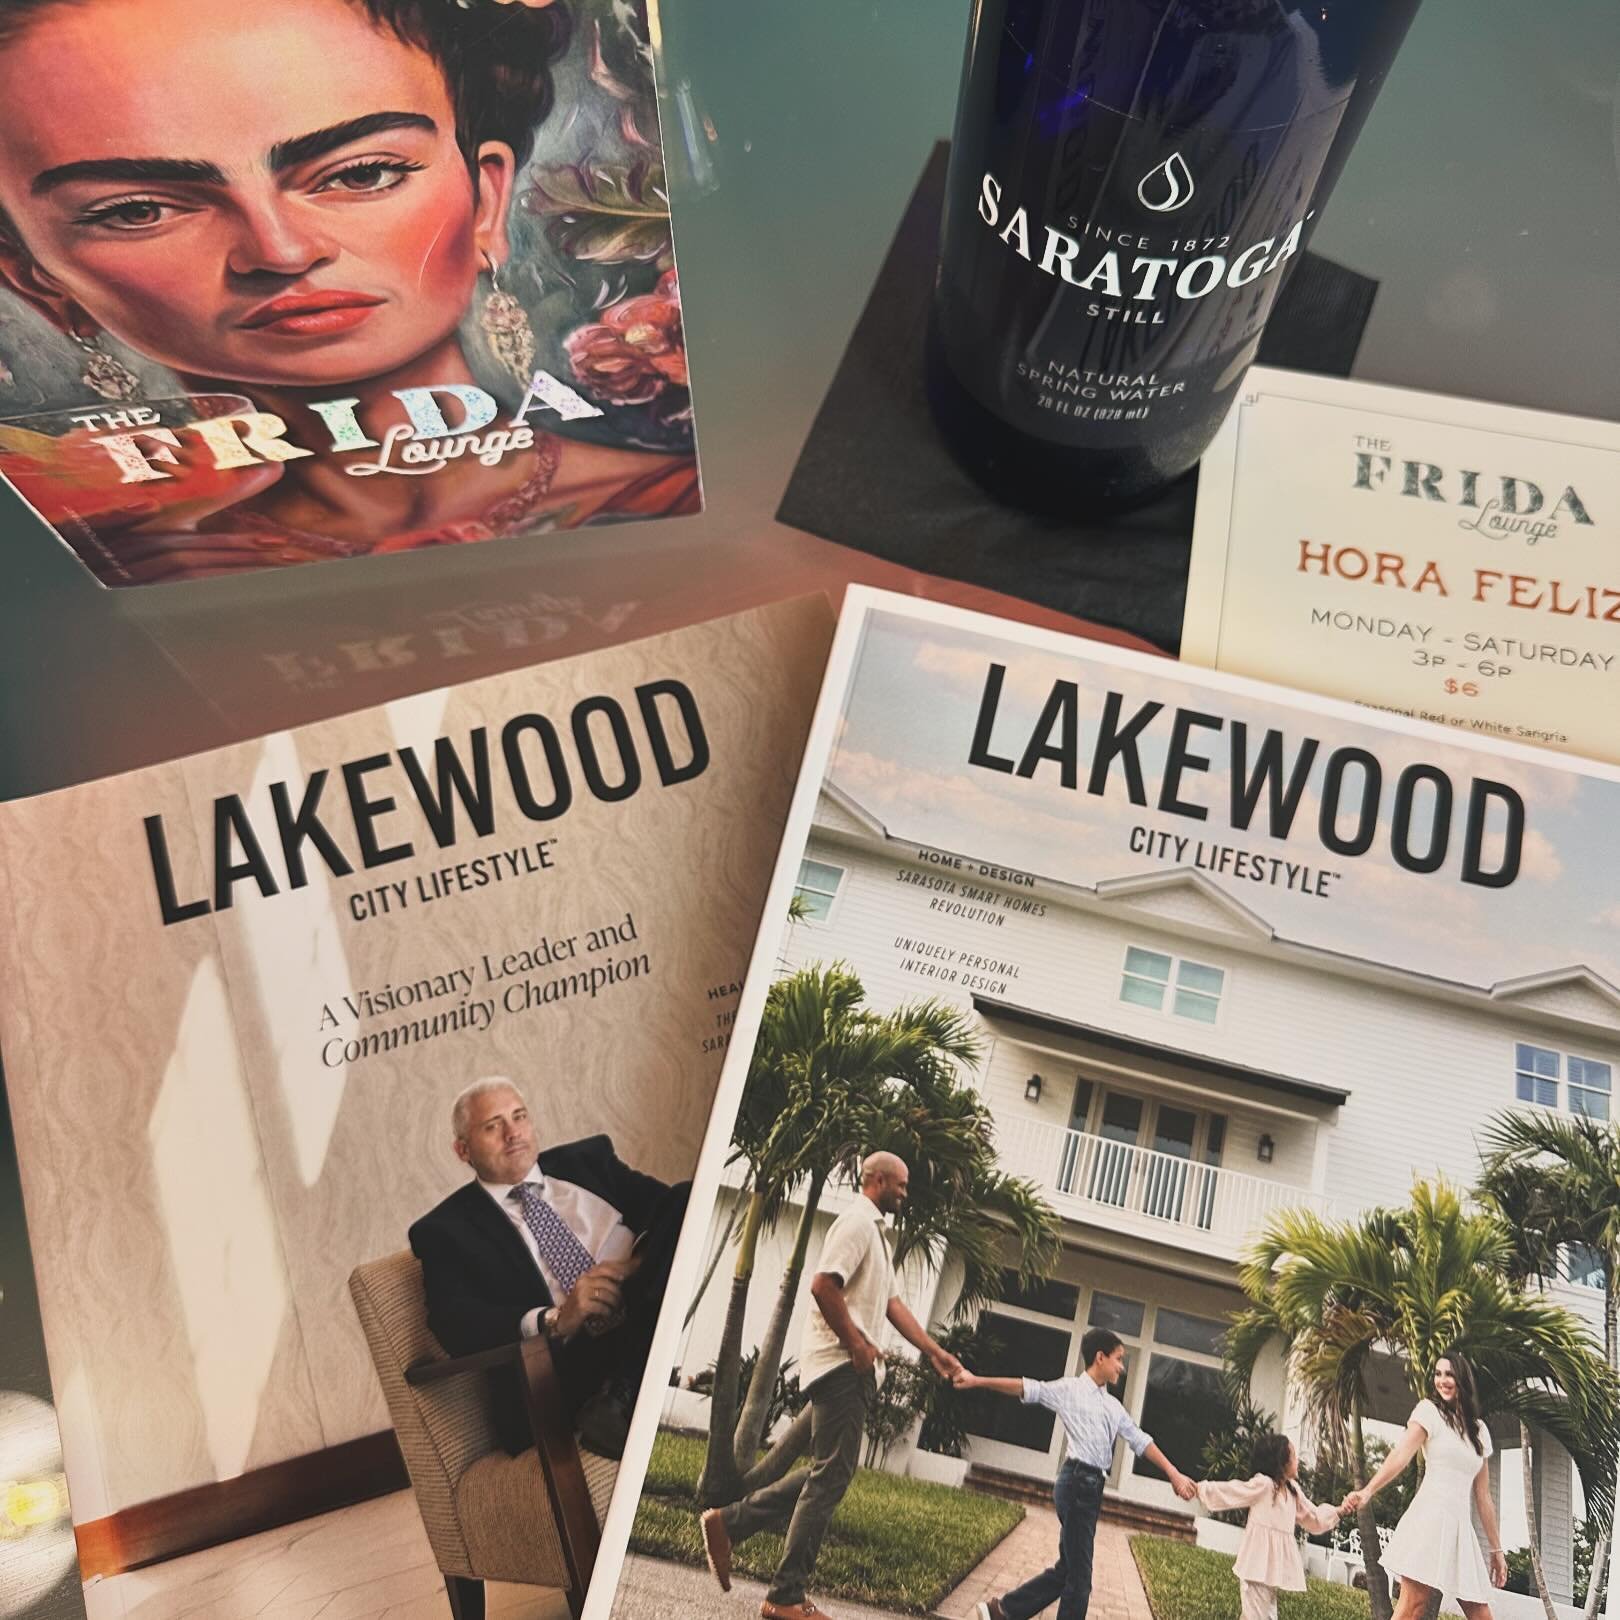 Worlds collide. 🌎 Excited for what&rsquo;s to come with @lakewoodcitylifestyle @lipsticklexart and @kolucansrq this Summer! 
&bull;
&bull;
&bull;
#partners #artandfood #kolucan #happyhour #horafeliz #lakewoodcitylifestyle #lipsticklex #sarasota